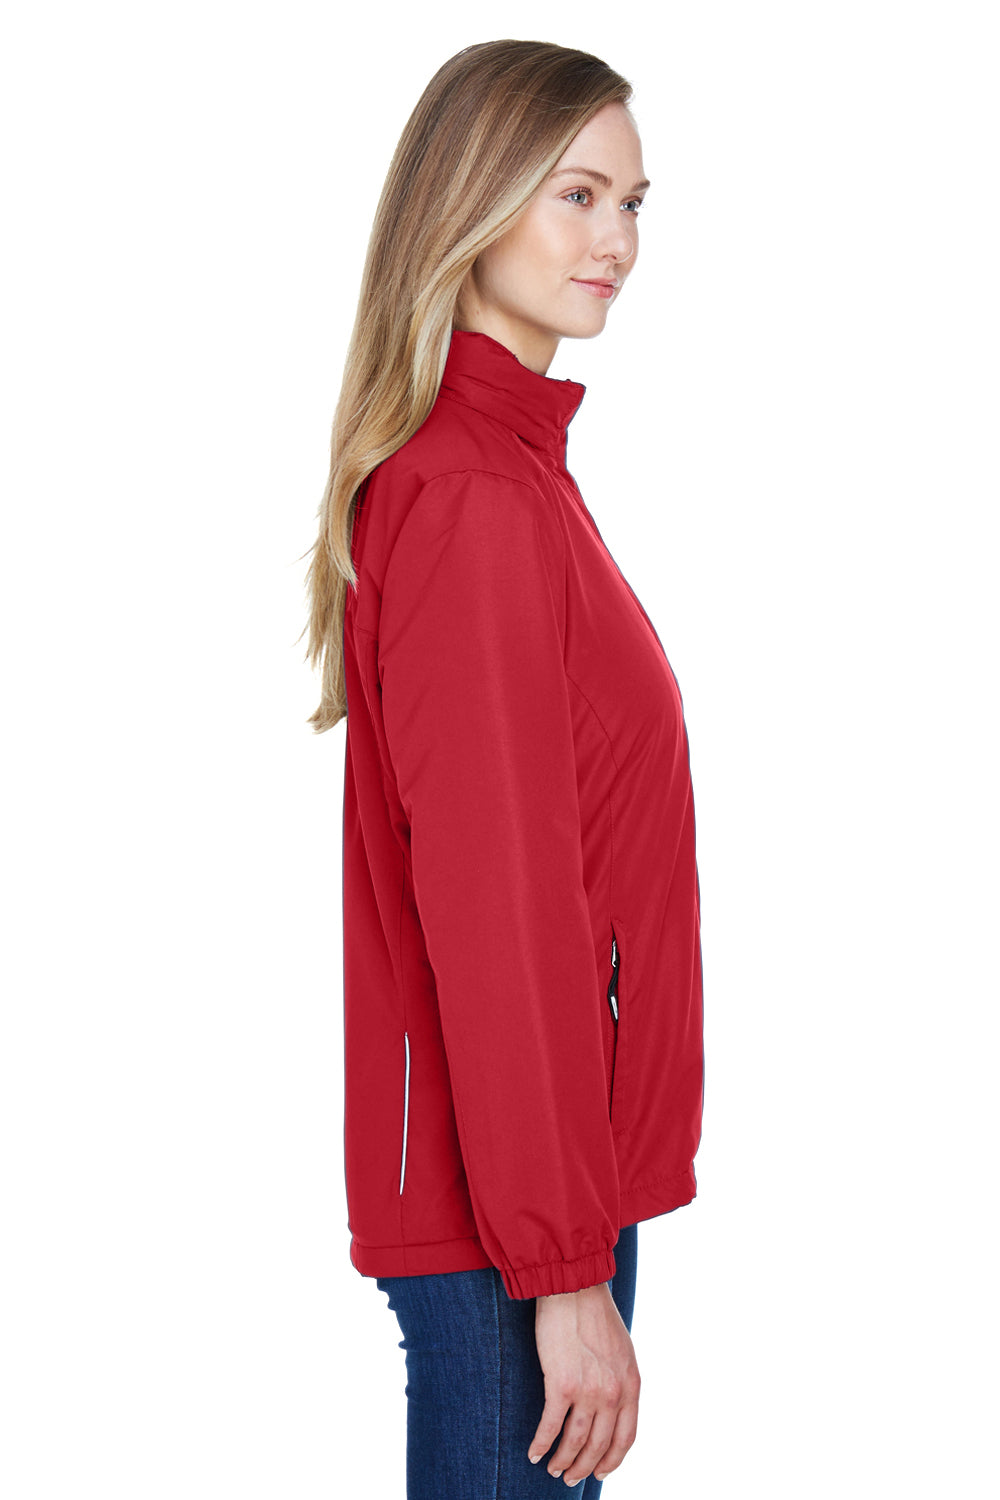 Core 365 78224 Womens Profile Water Resistant Full Zip Hooded Jacket Red Side